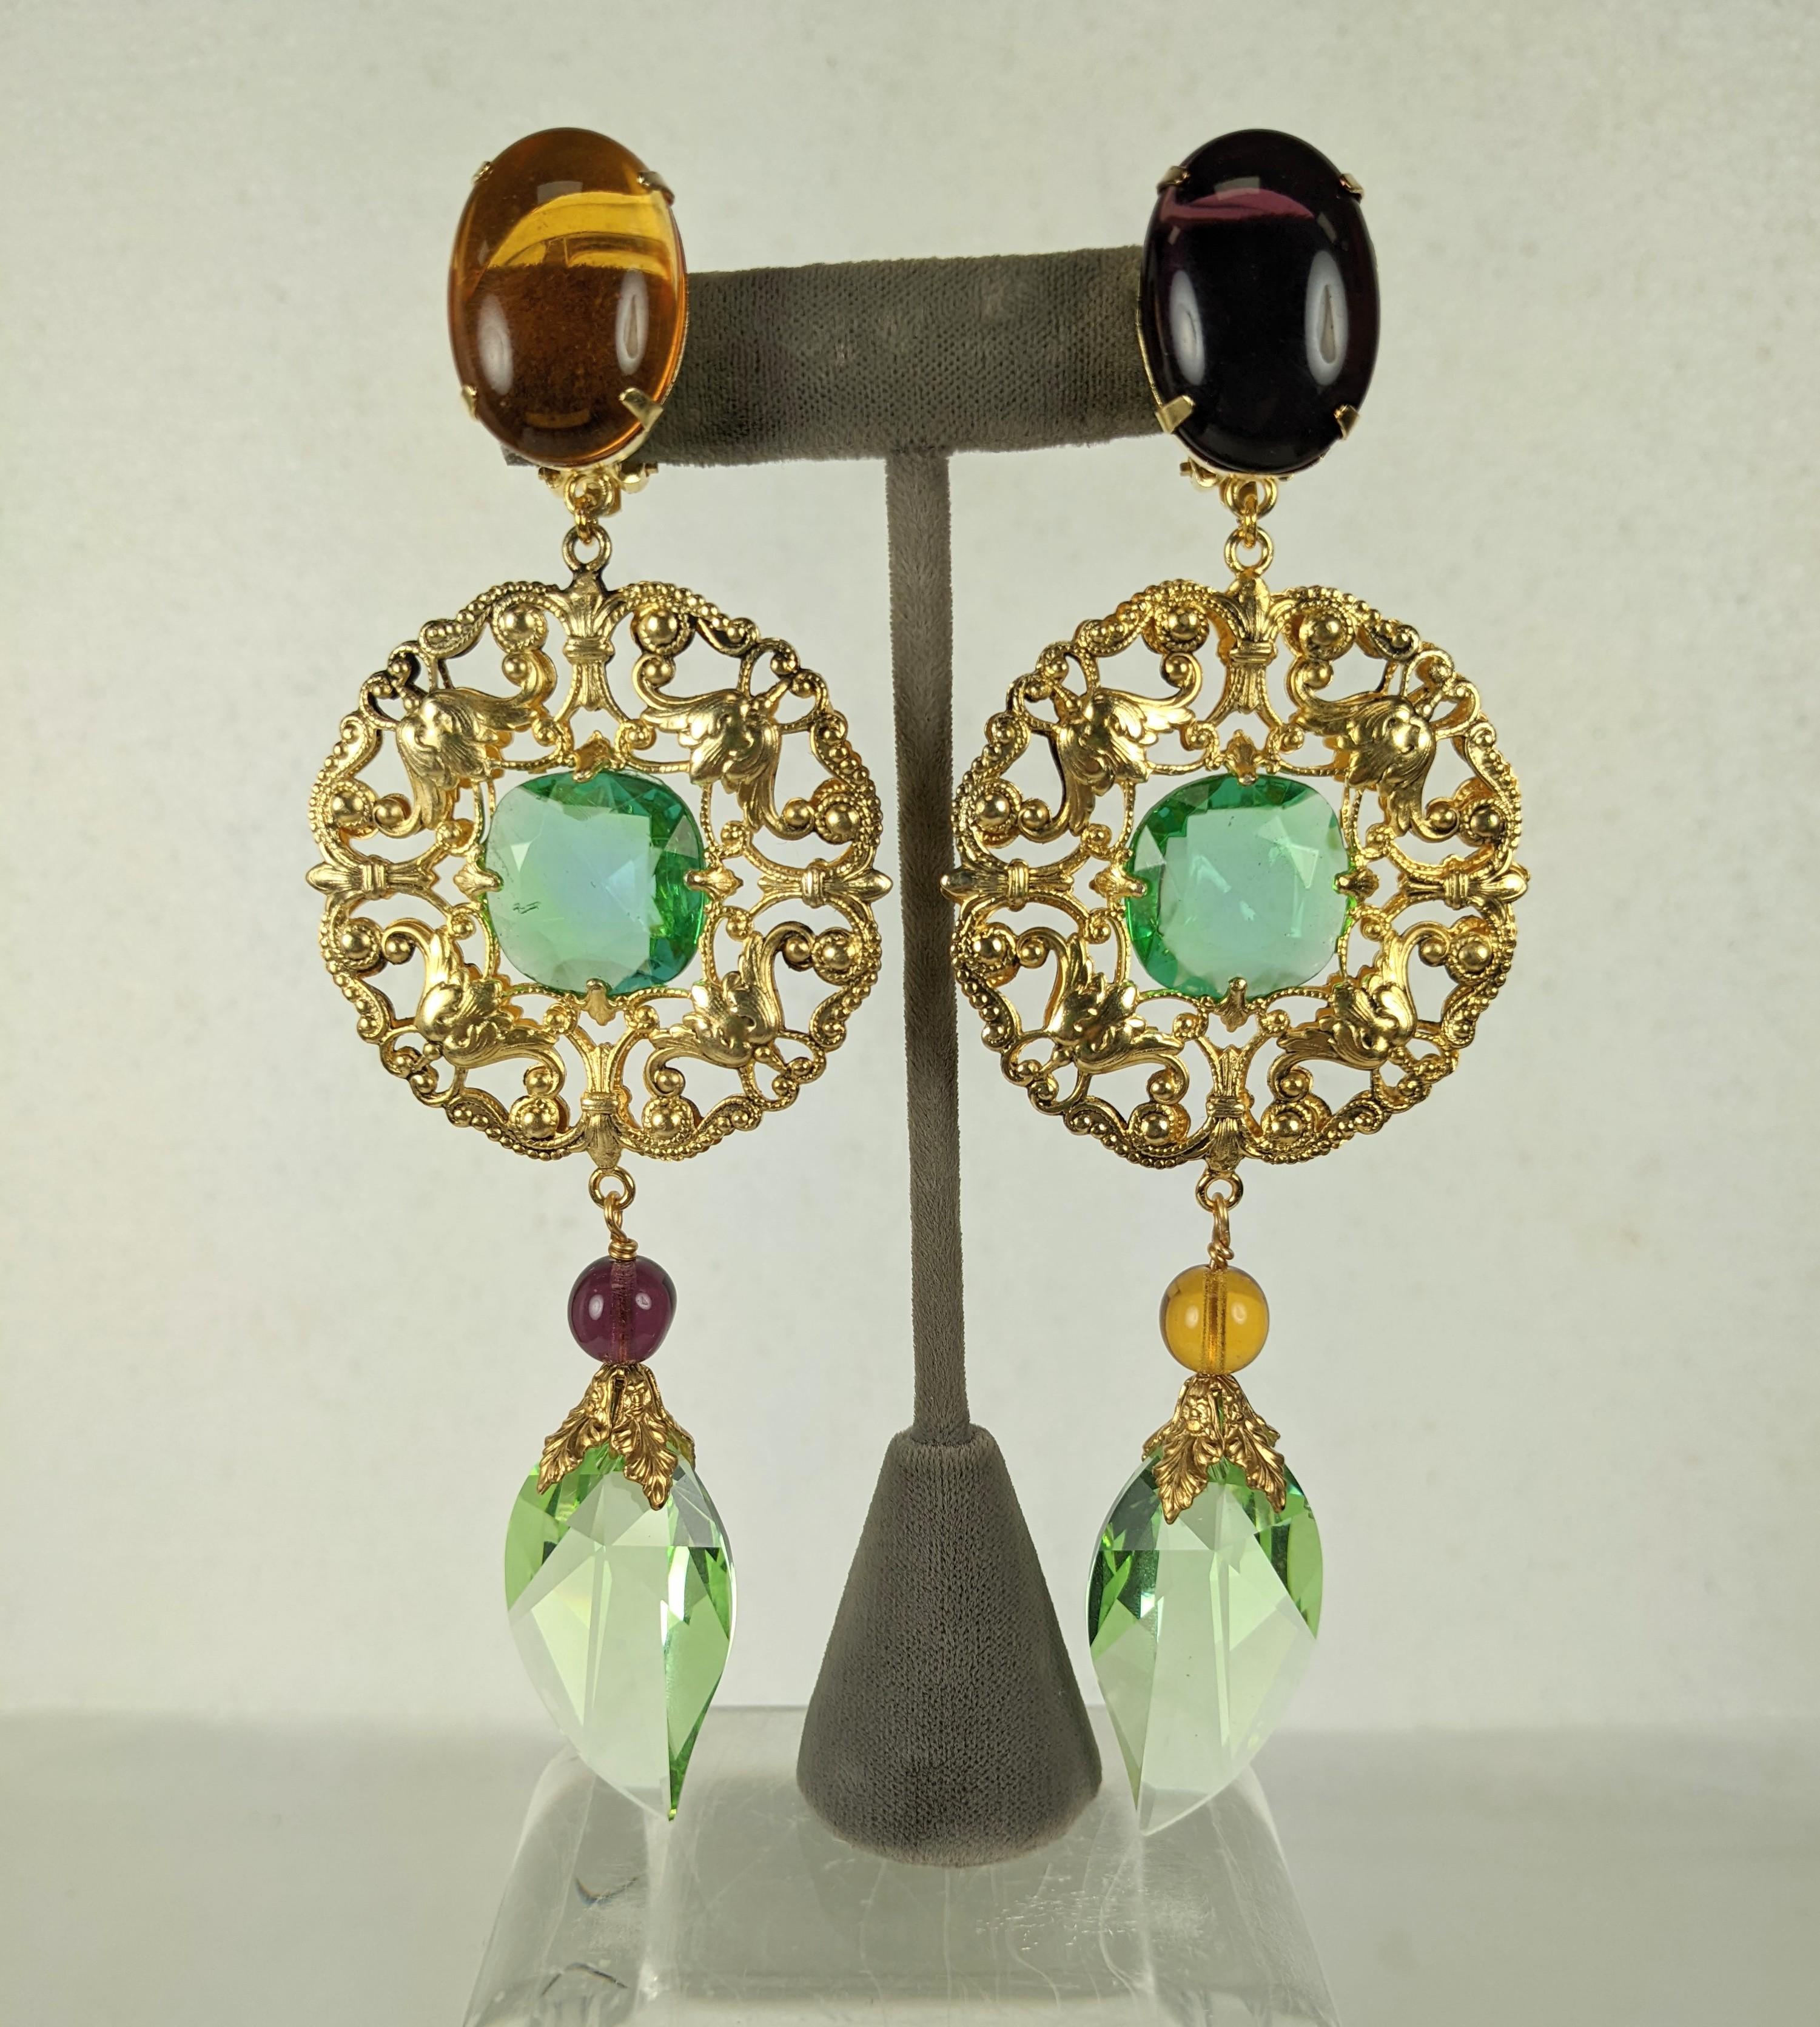 Maison Goossens for Yves Saint Laurent Baroque asymmetric long imposing earrings of ornate gold plated filigree, amythest and topaz pate de verre beads and oval cabochons with cut crystals of green peridot with faceted leaf shaped Swarovski